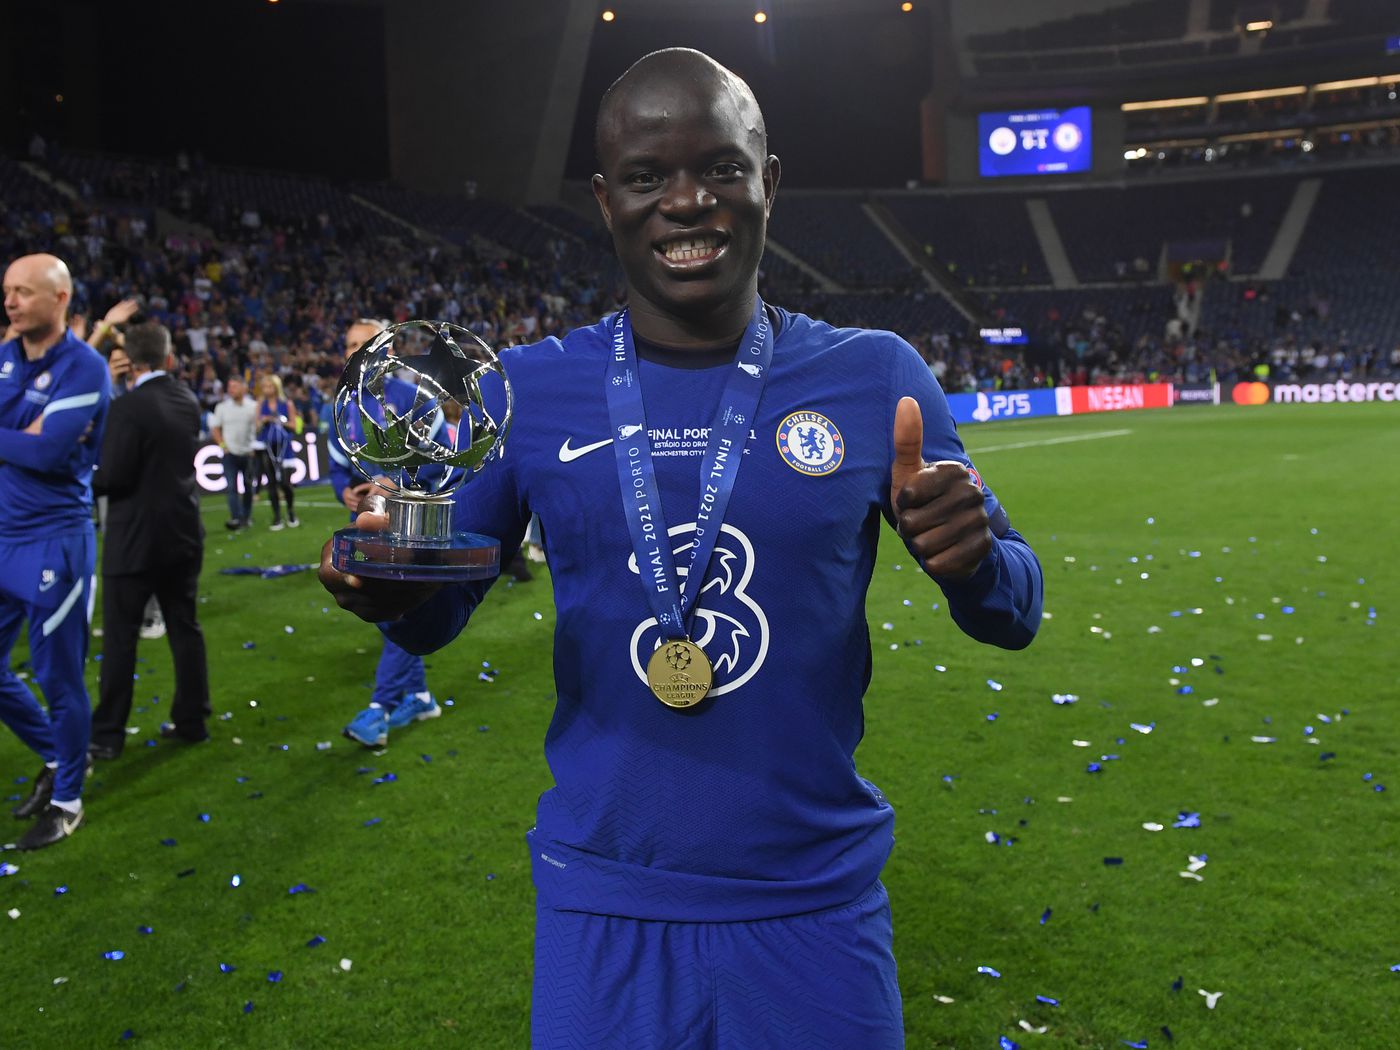 It's time to give N'Golo Kanté the Ballon d'Or Ain't Got No History